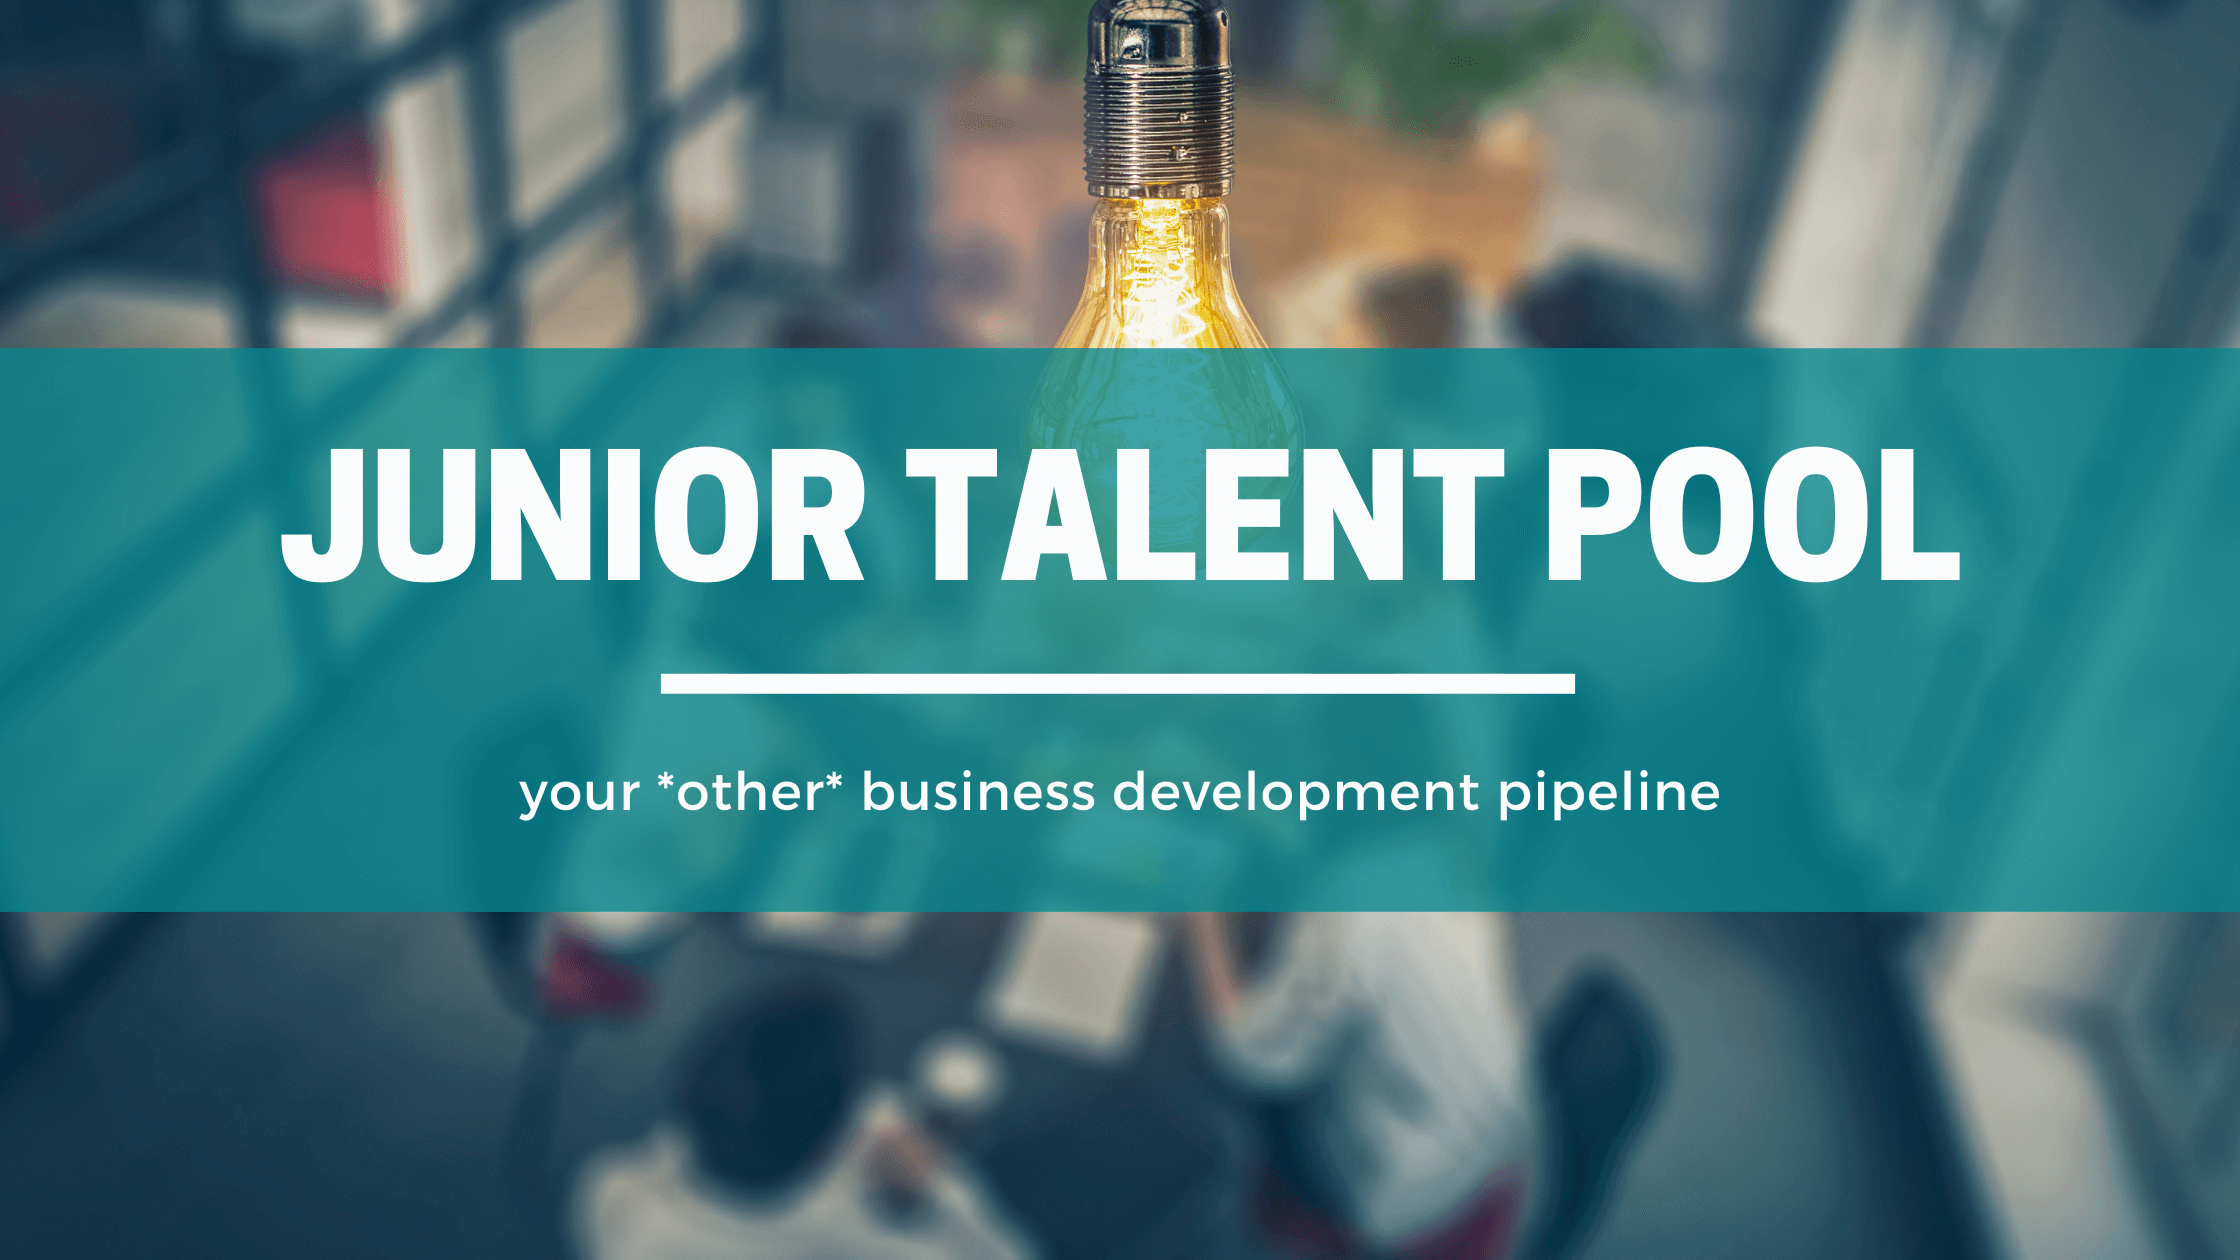 Junior talent pool, your other bd pipeline